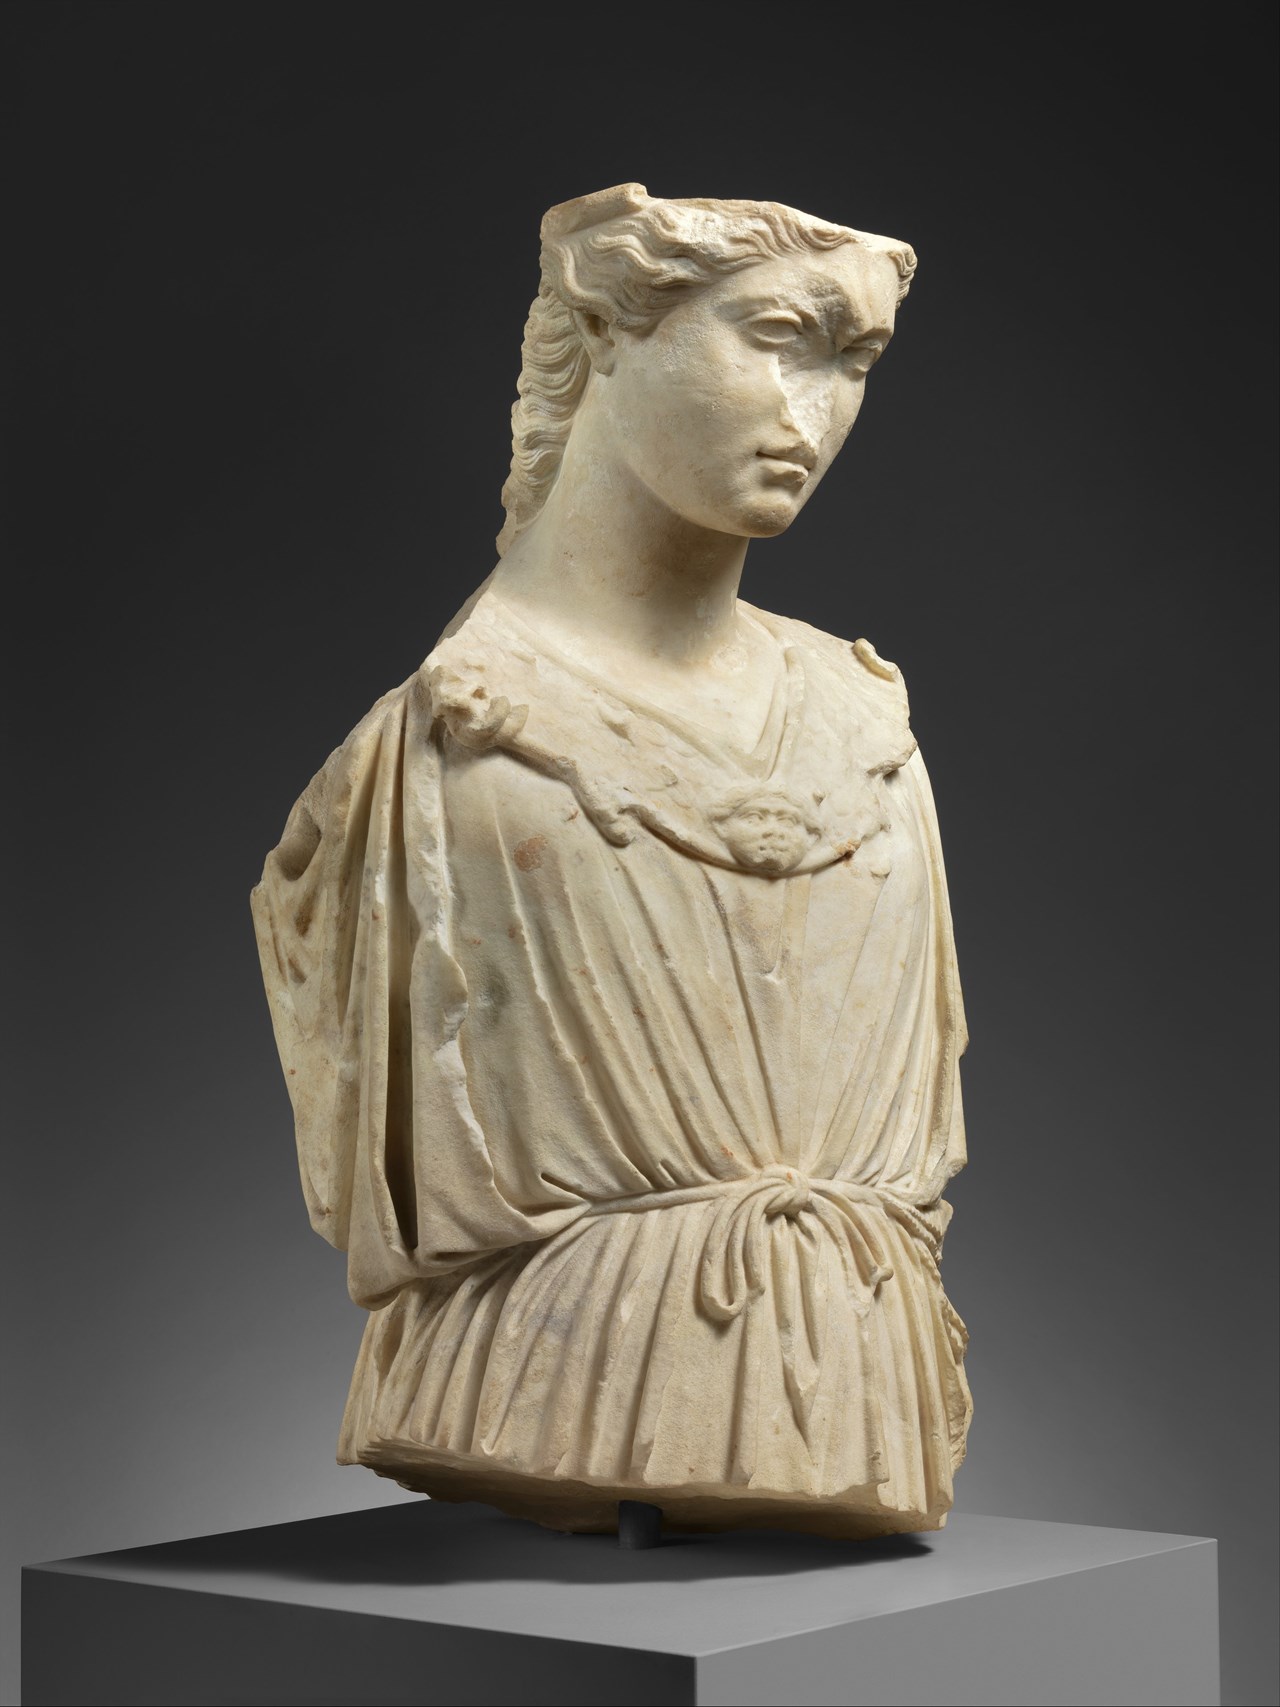 Marble head and torso of Athena Roman  1st–2nd century CE https://www.metmuseum.org/art/collection/search/251476